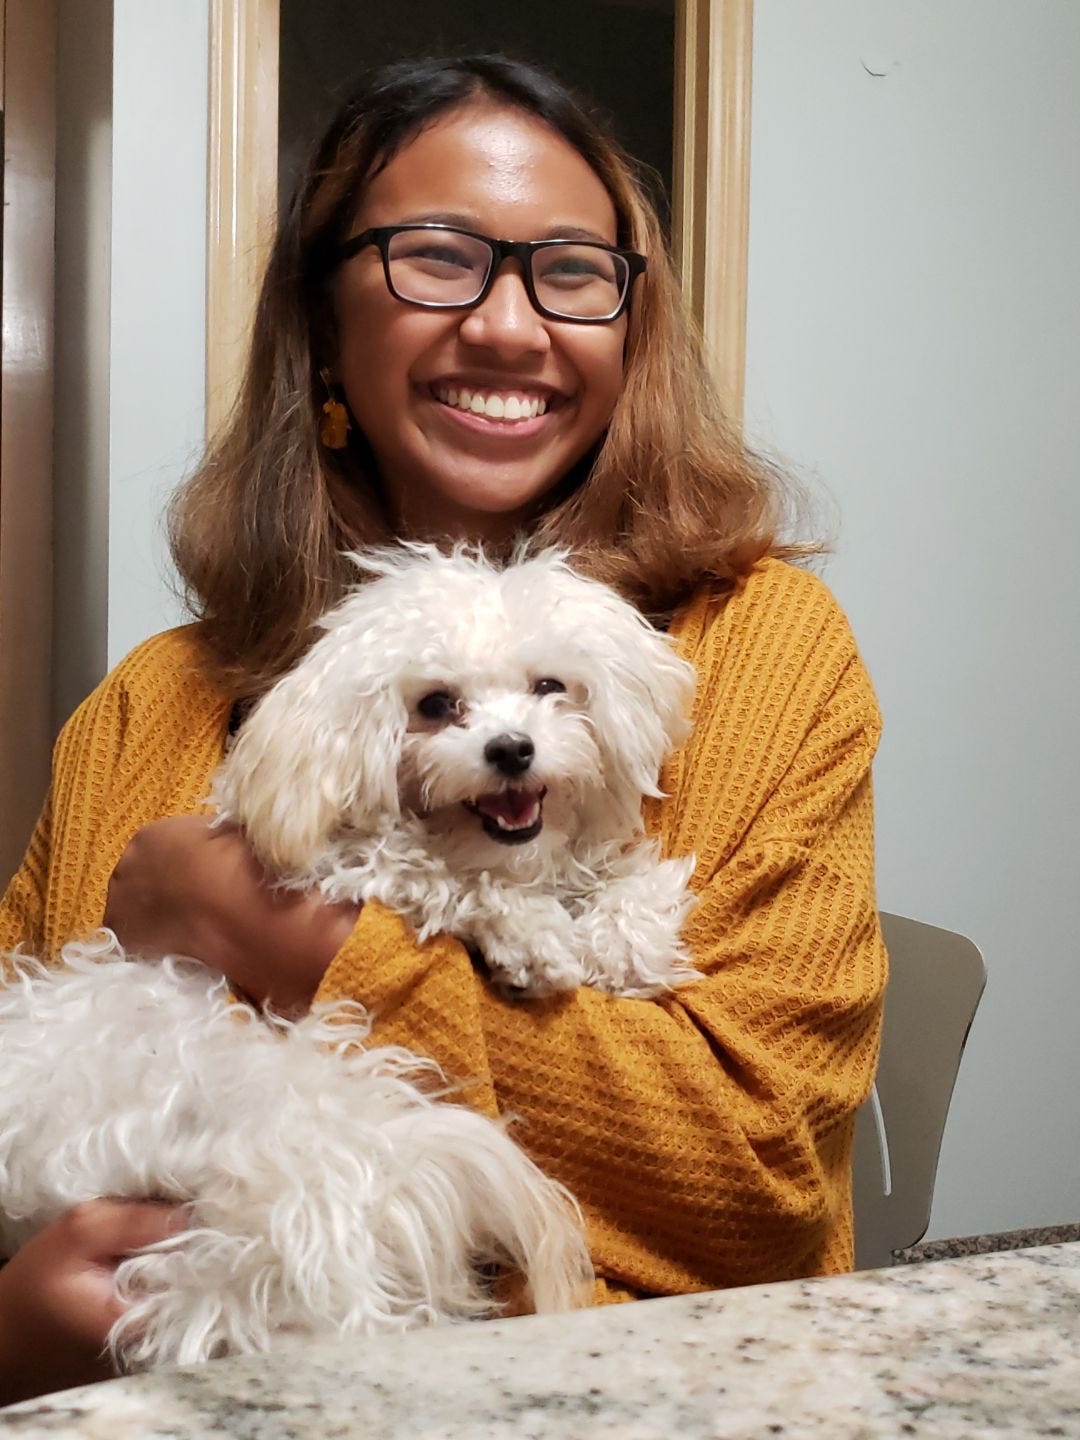 Melissa sits in a chair next to a table. She is holding a fluffy, small white dog and smiling widely. The dog is also smiling.